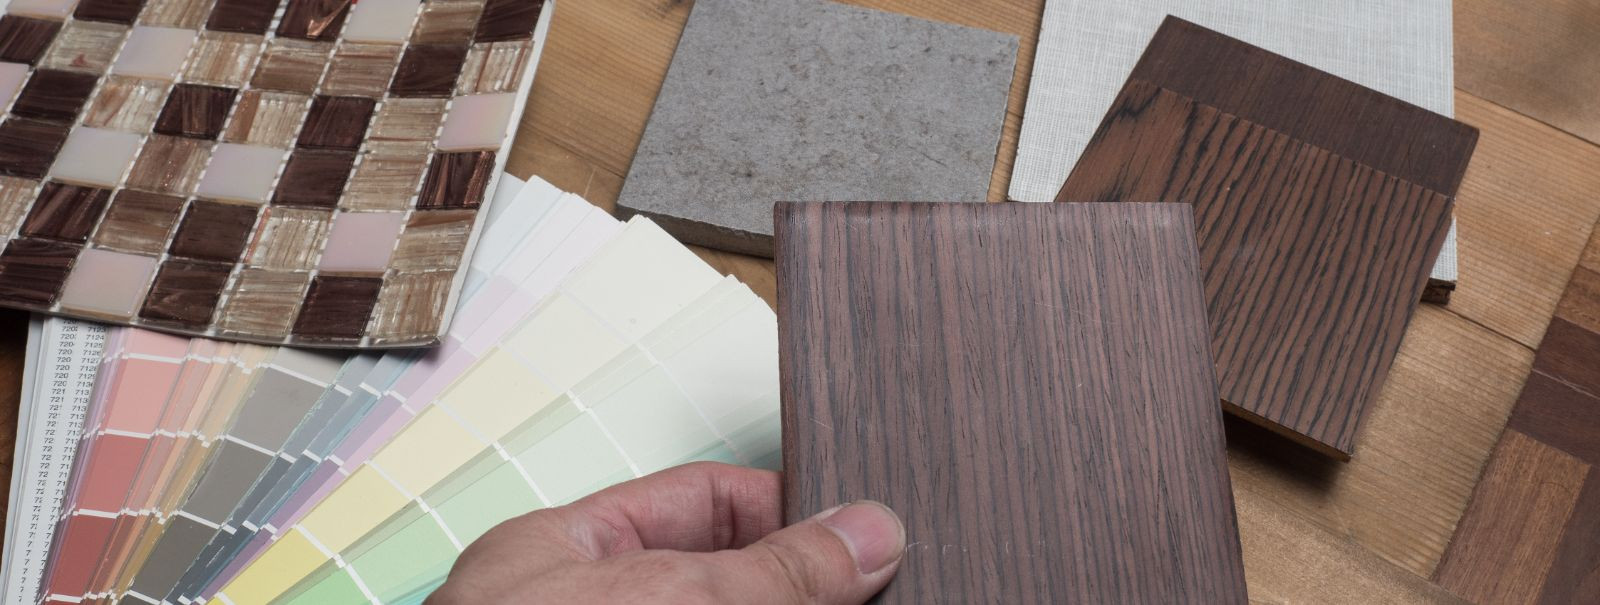 Sustainable building materials are products and resources used in construction that are environmentally responsible and resource-efficient throughout their life